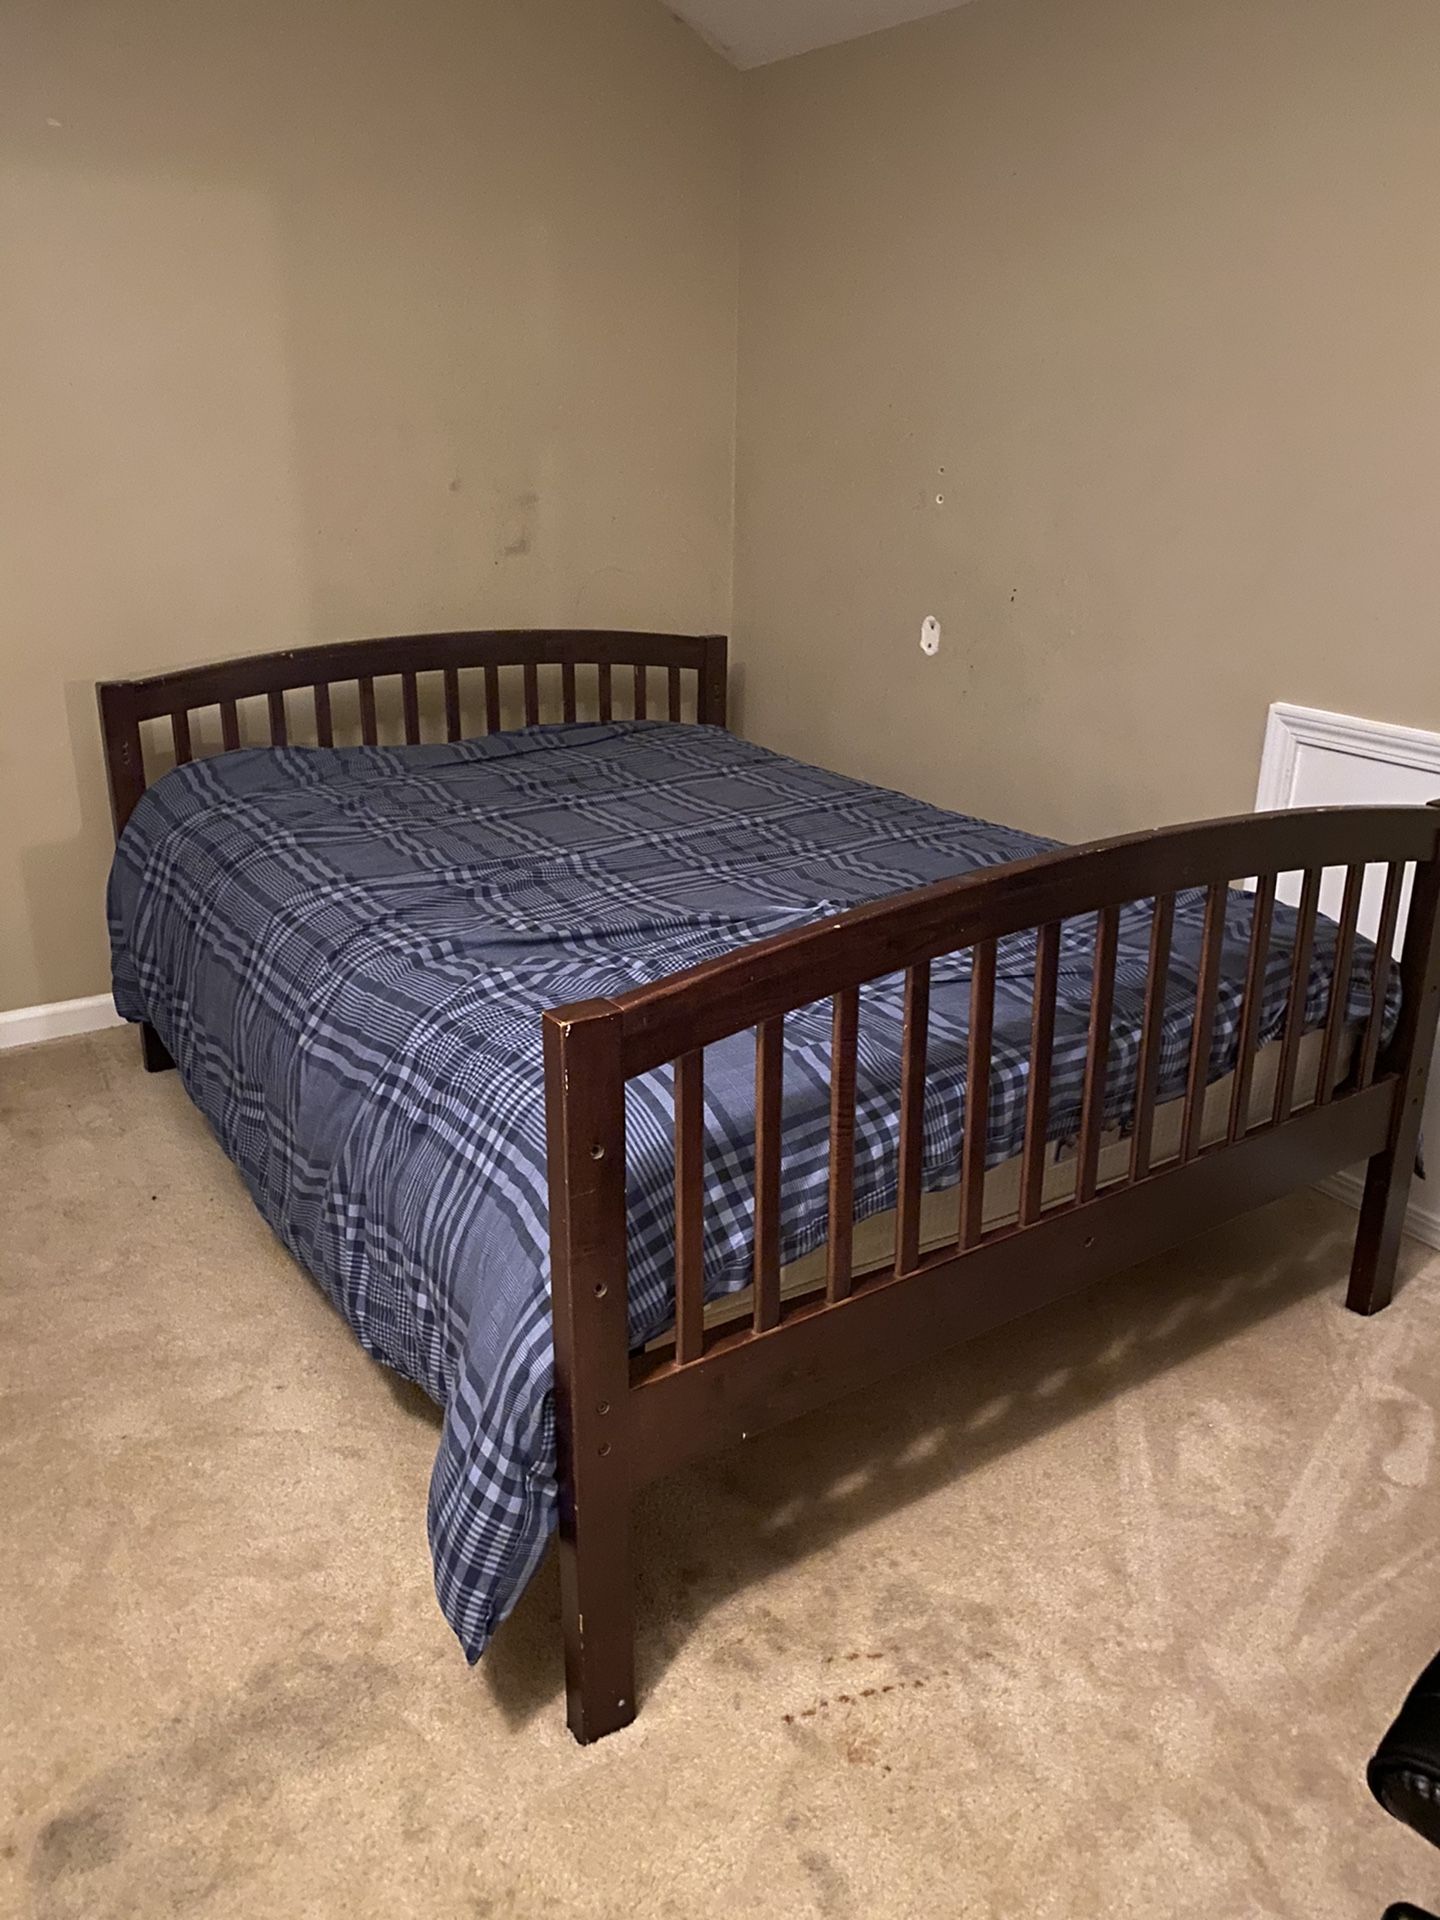 Full size bed frame with mattress